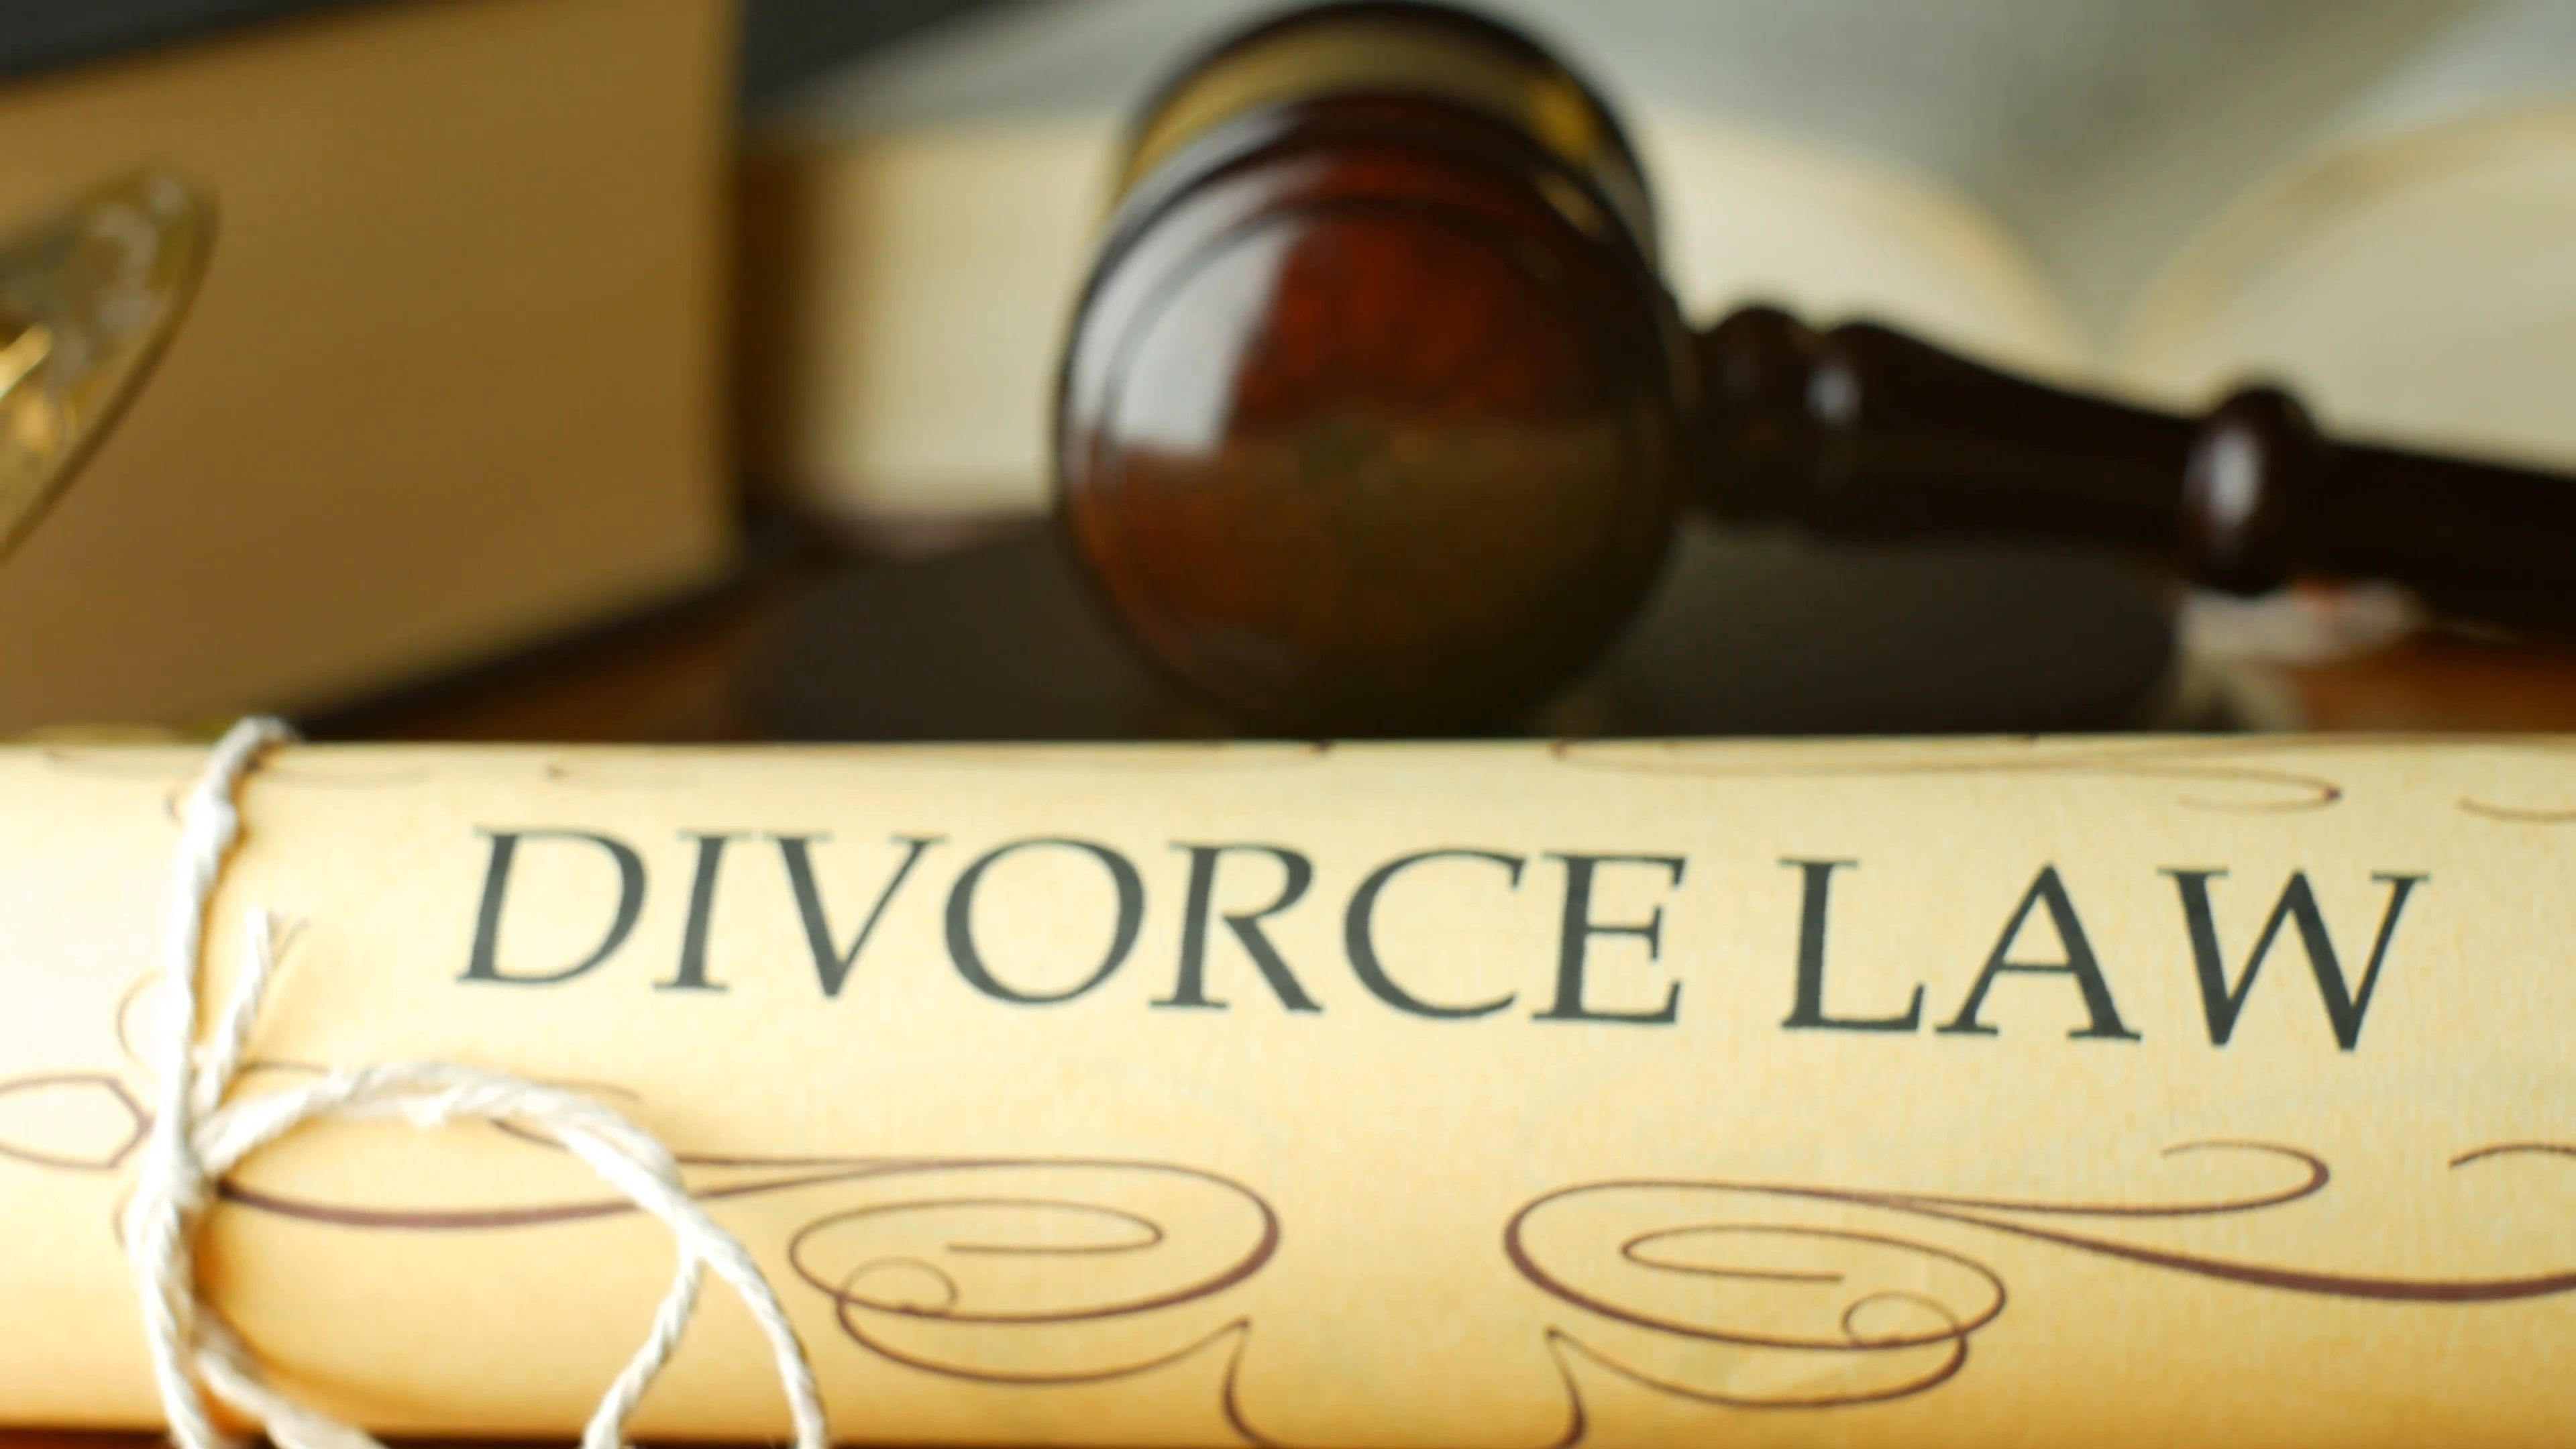 divorce-court-law-justice-litigation-concept-with-gavel-and-hammer_n1xicnx-l__F0000